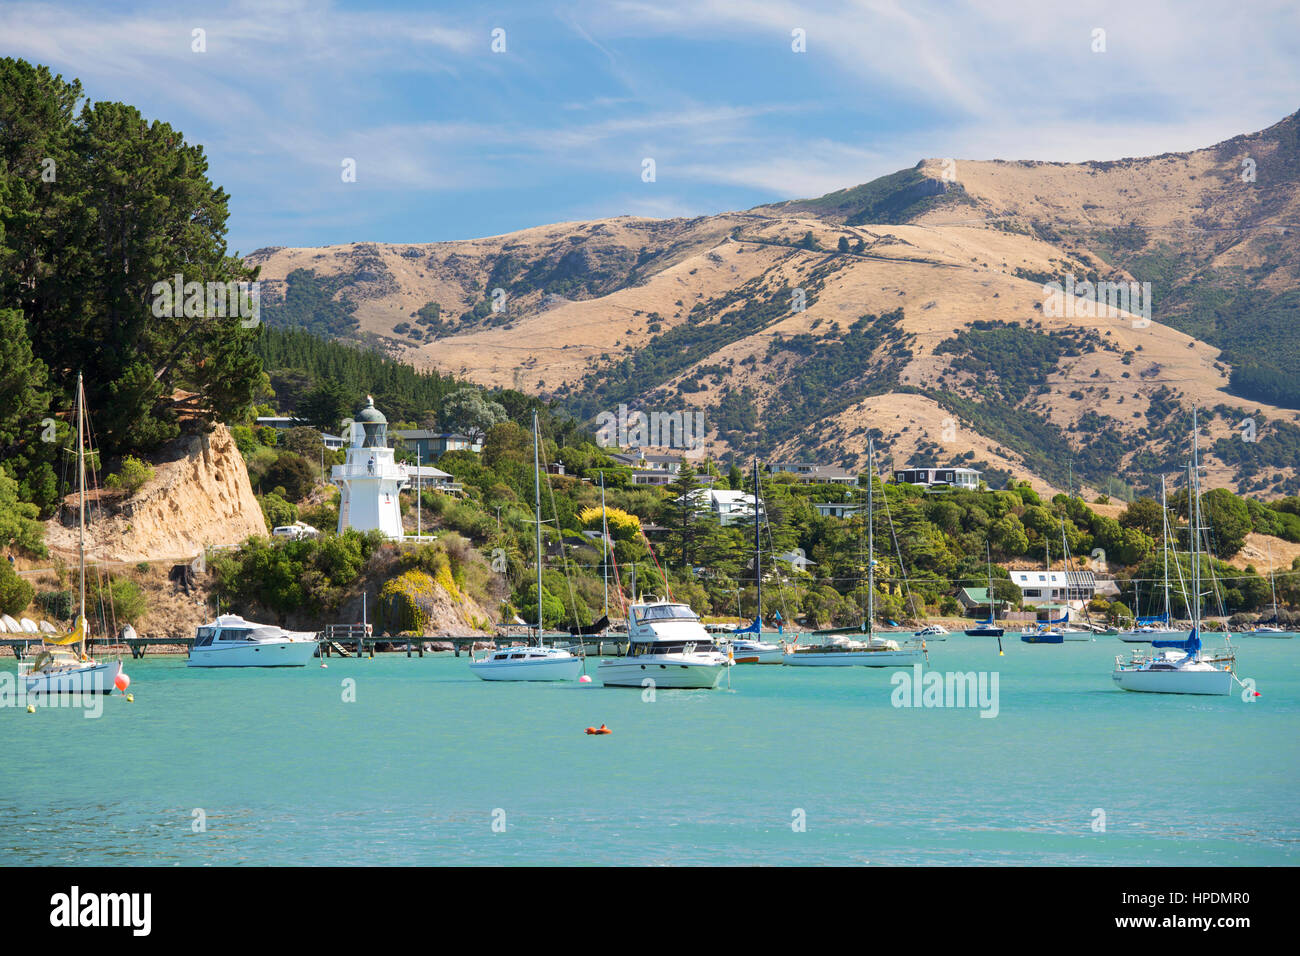 Akaroa, Canterbury, New Zealand. View across the turquoise waters of Akaroa Harbour, historic lighthouse prominent. Stock Photo